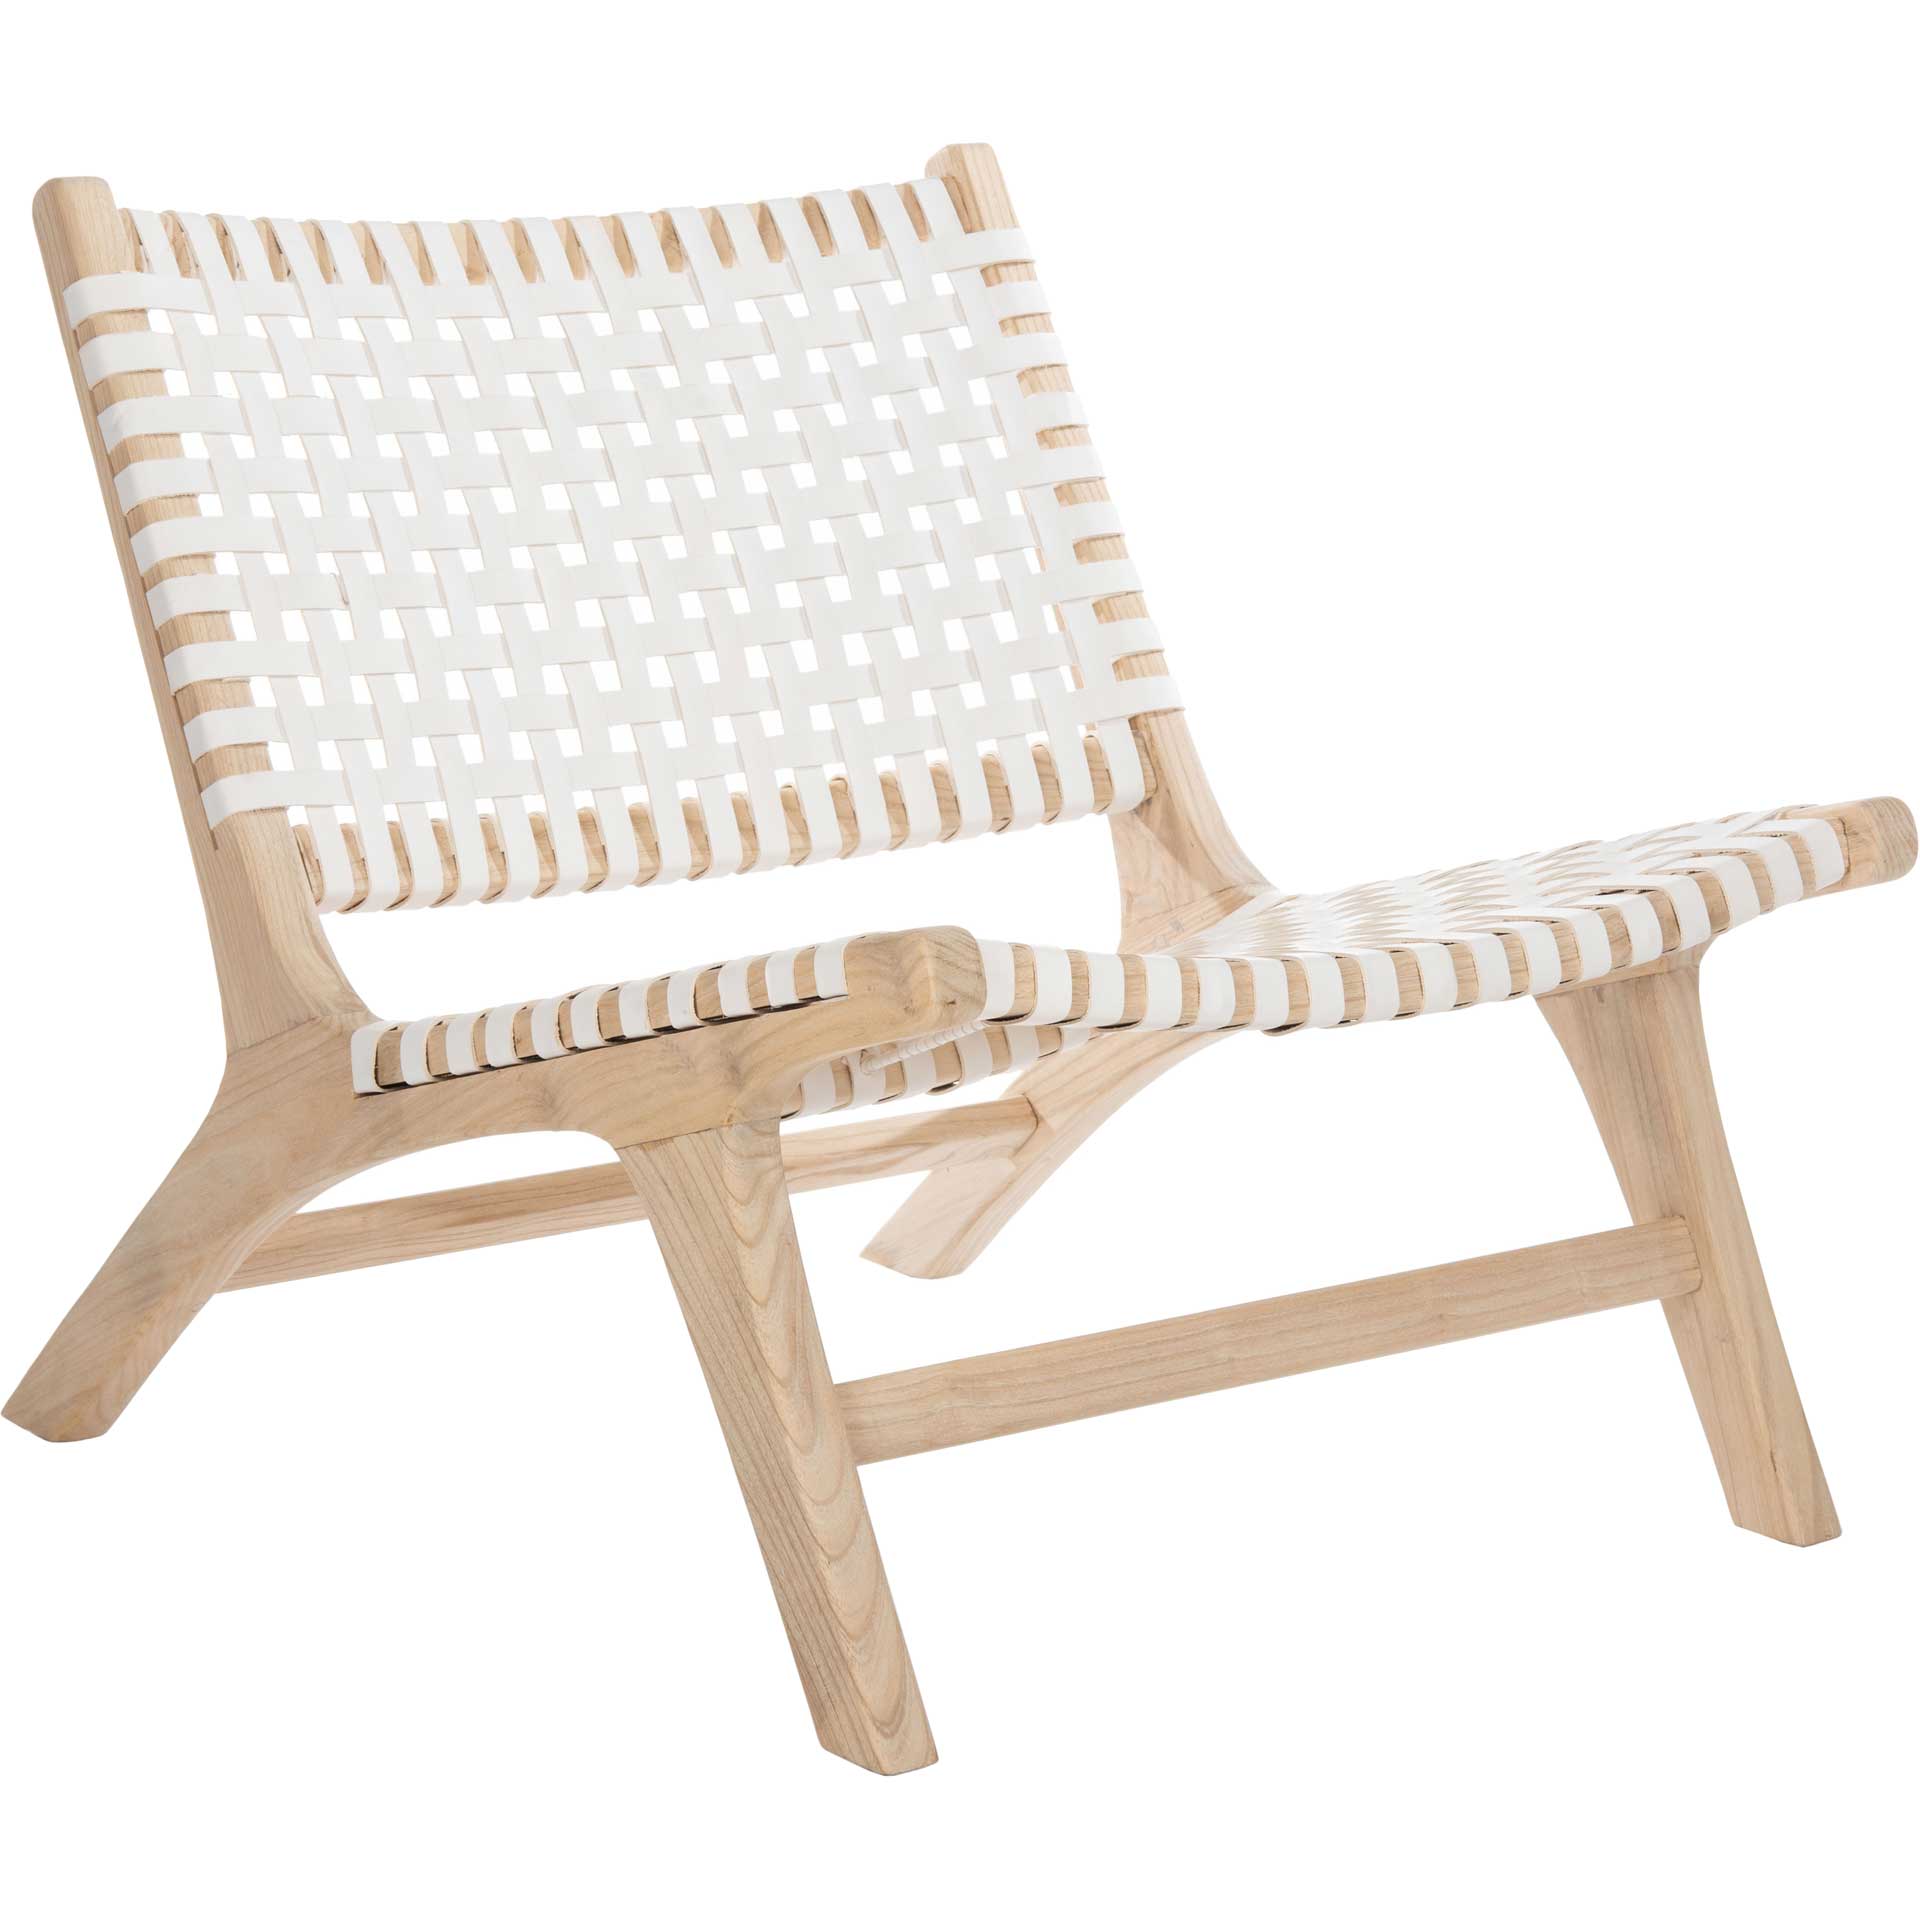 Luke Leather Woven Accent Chair Natural/White